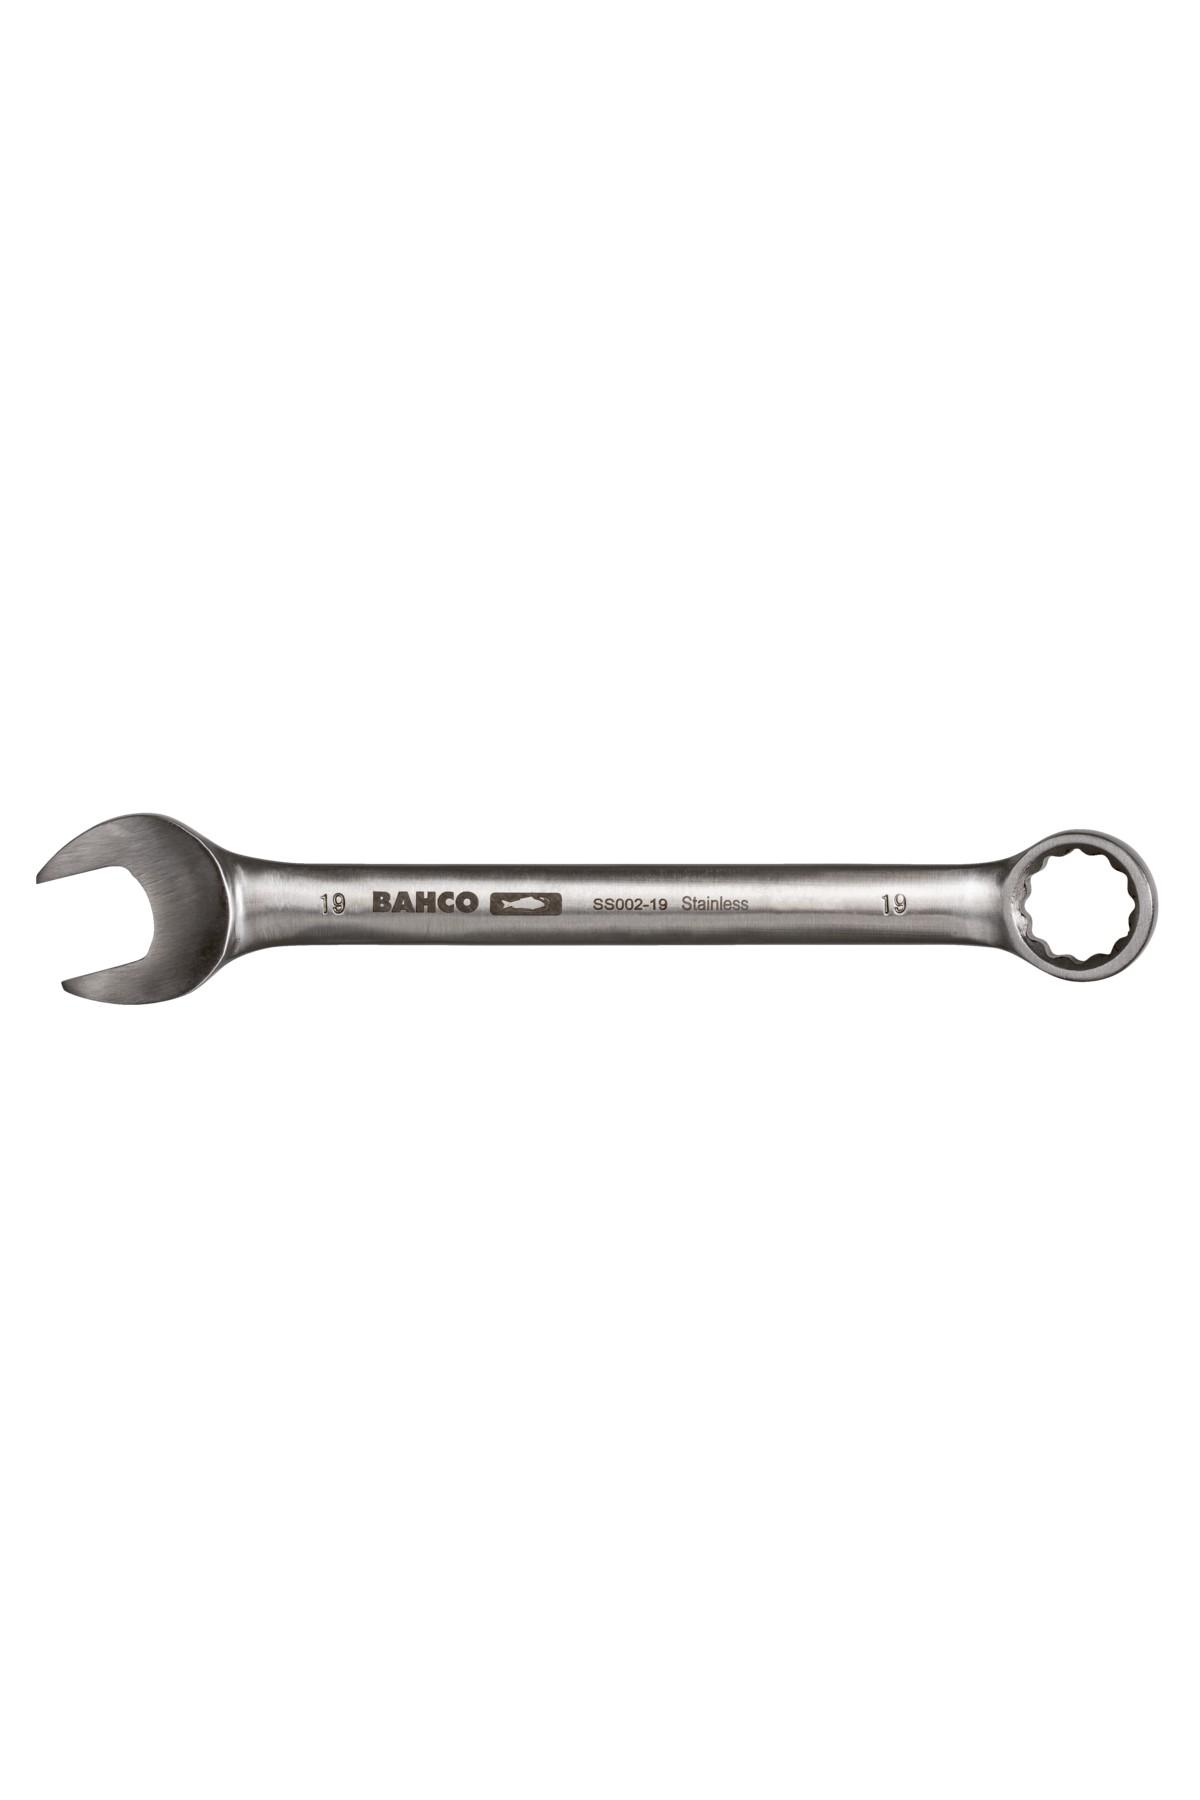 Ring spanner stainless steel SS003 1/4